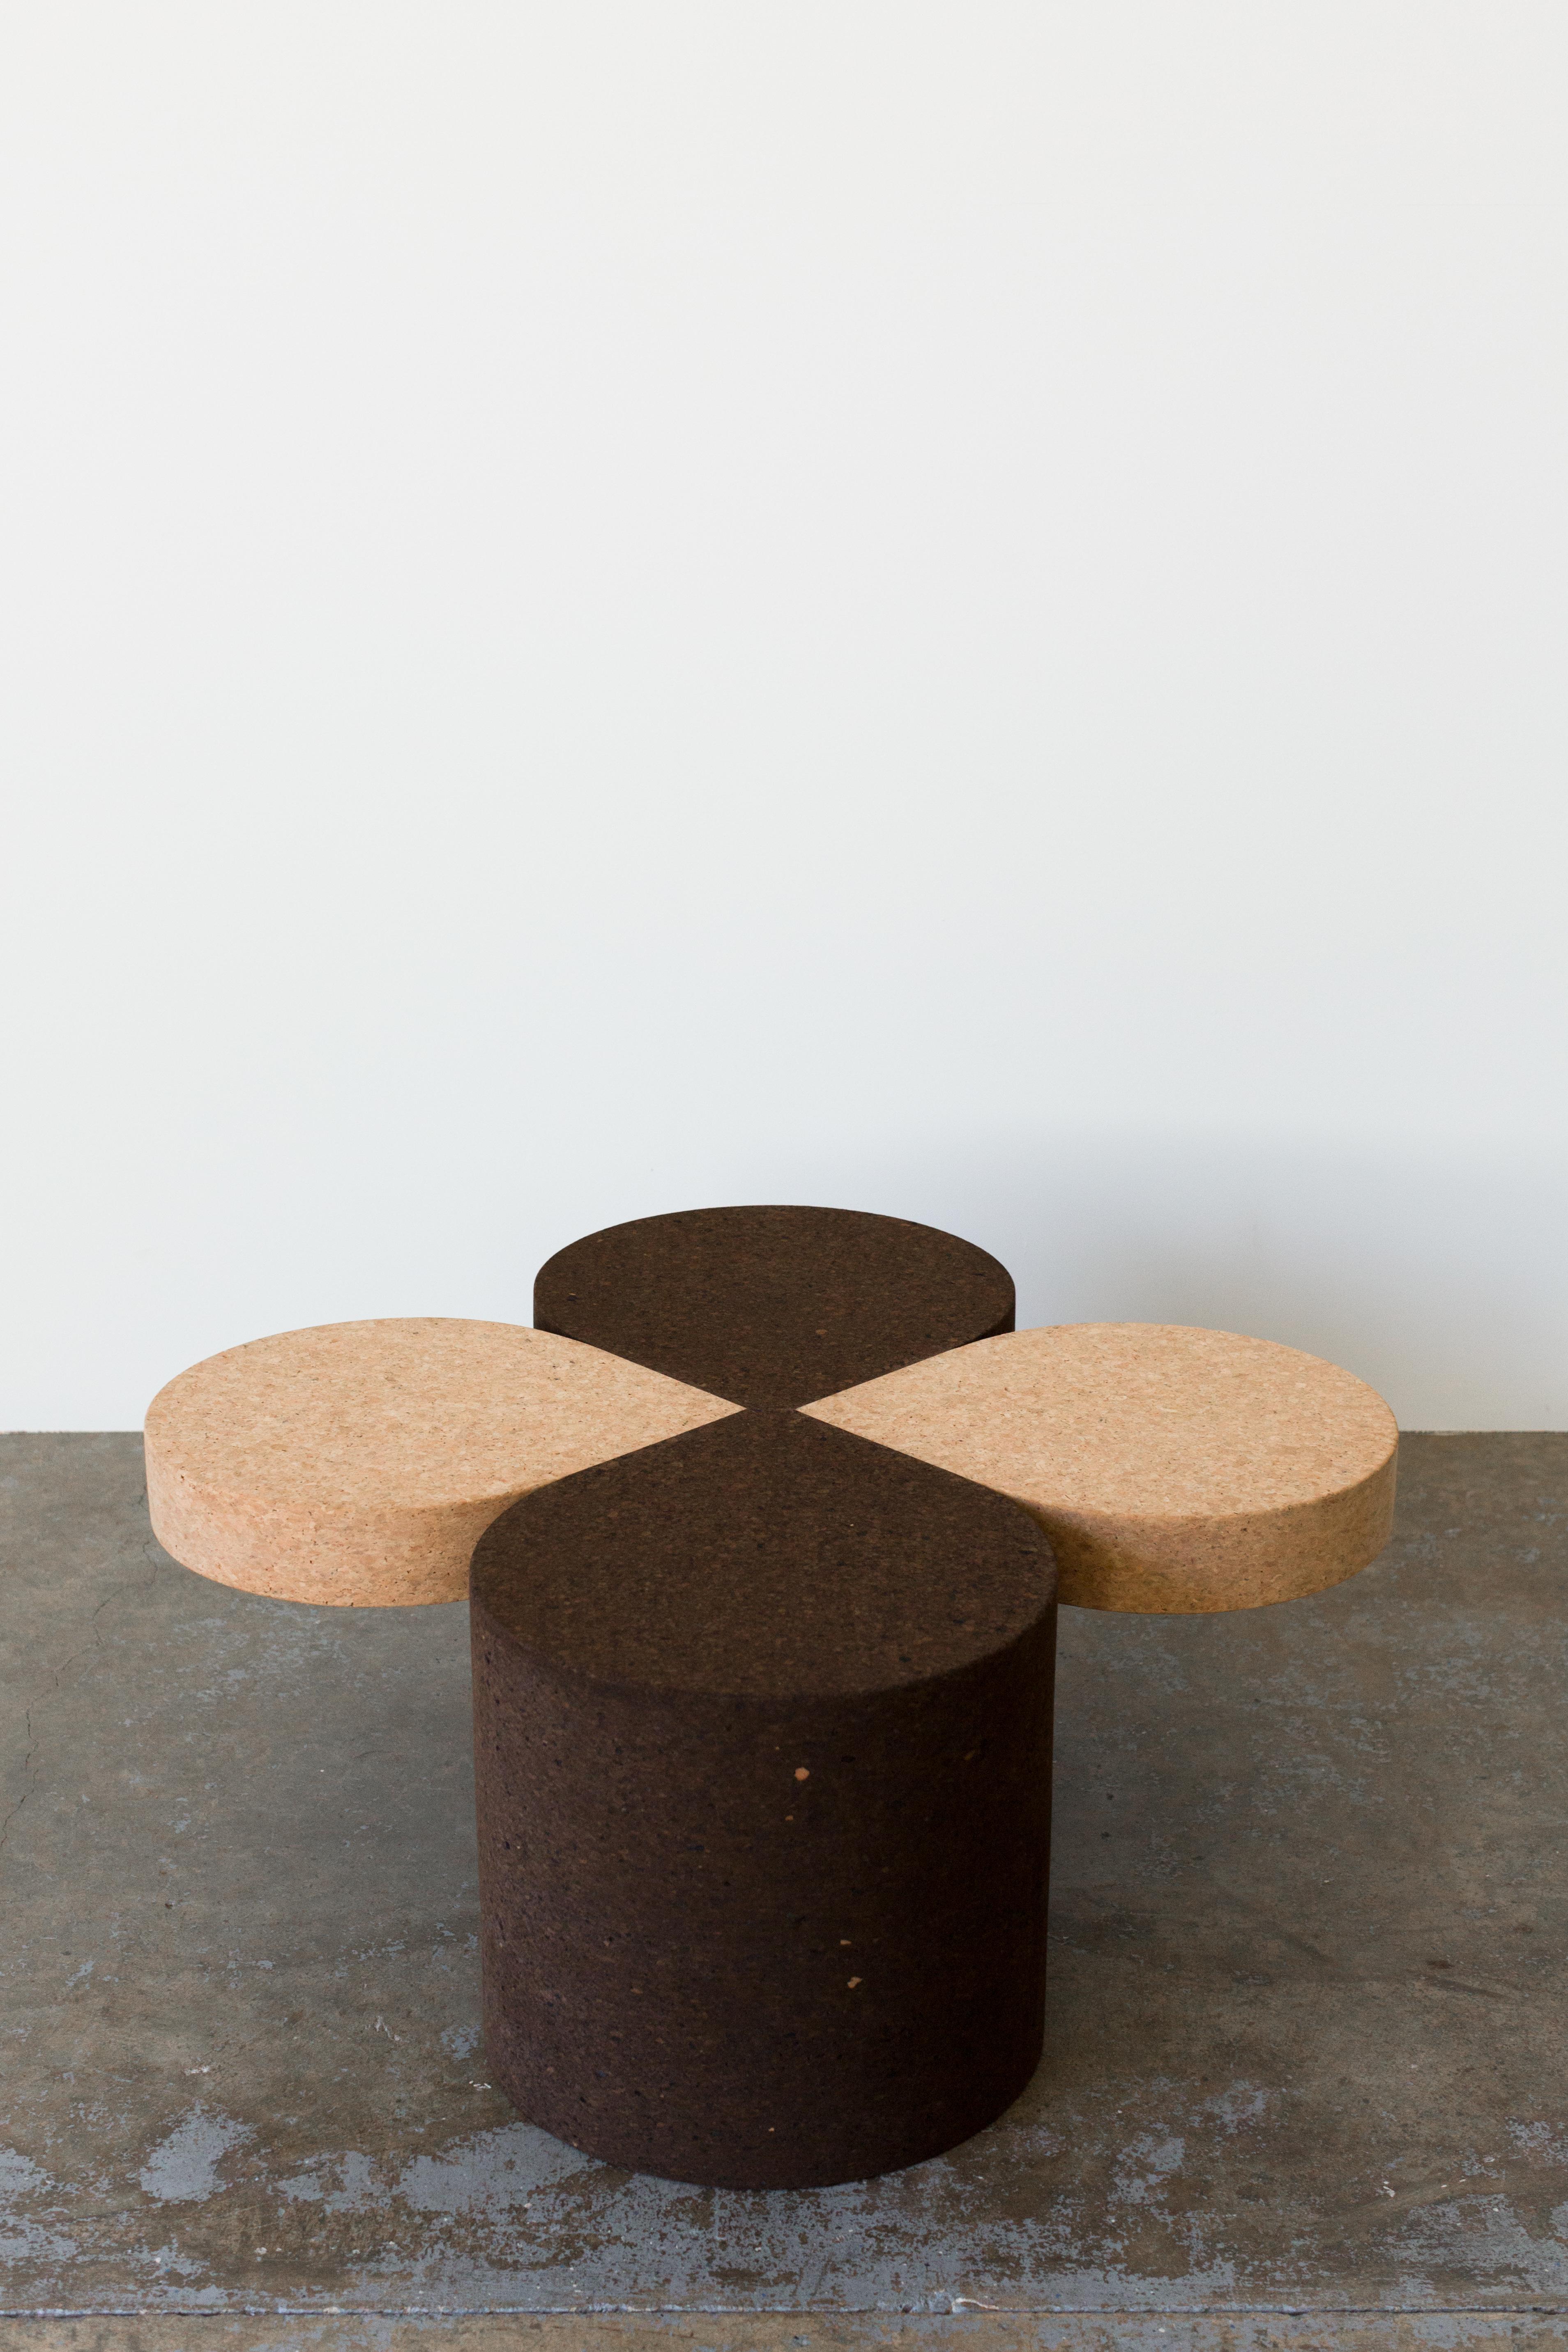 A realization of meticulous research, this piece is part of a collection that highlights the formal longevity and environmental sustainability of Mediterranean cork.

Monolithic and inviting, it is cut from the cylindrical forms that are standard